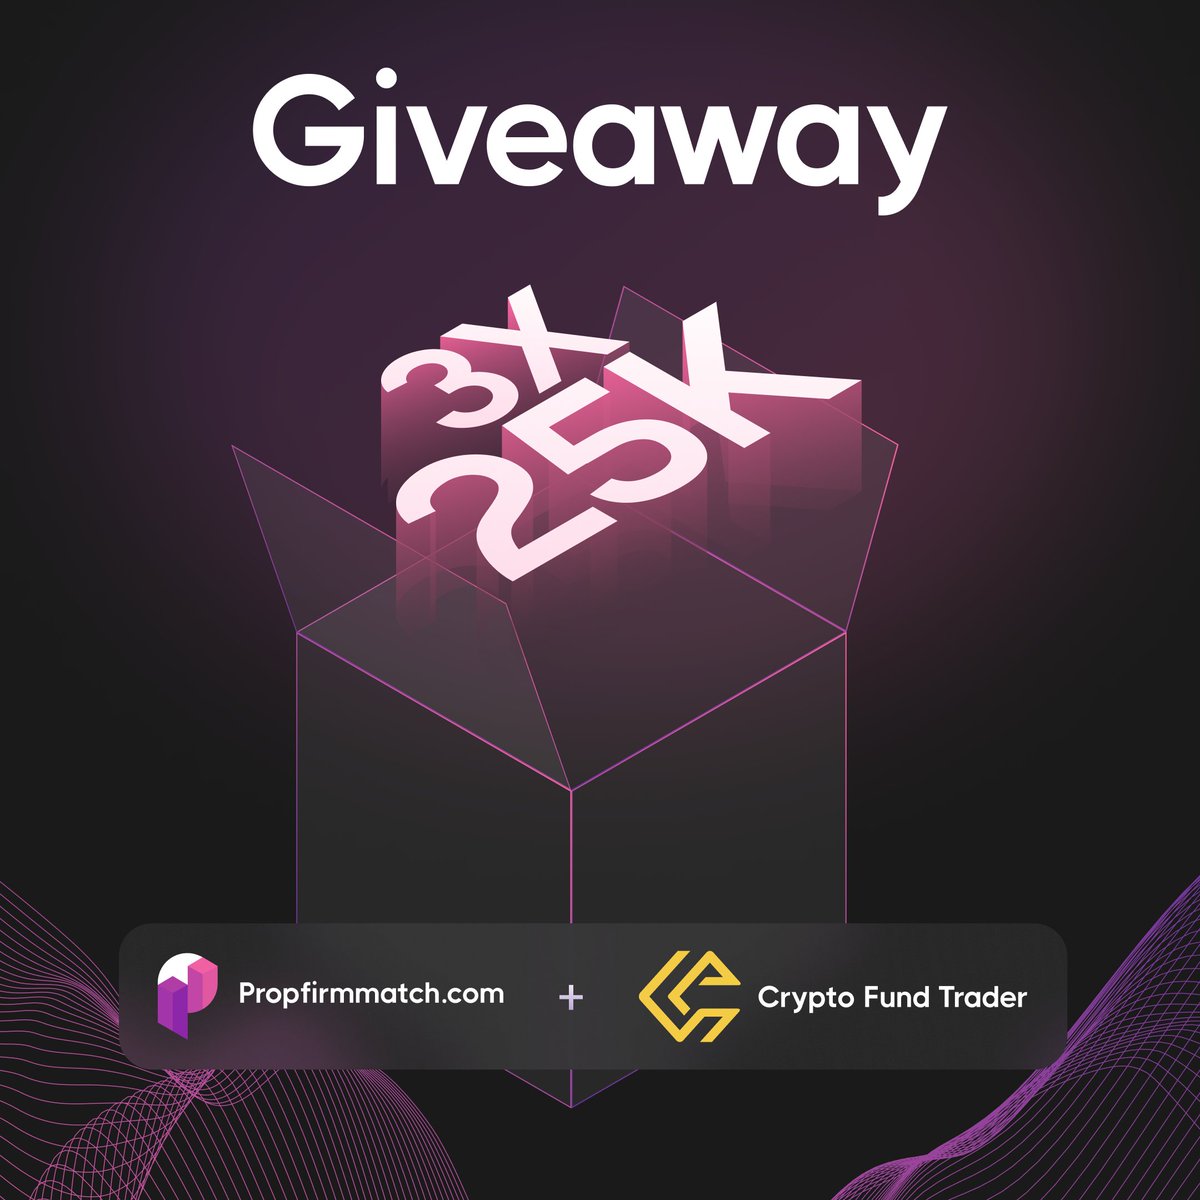 3x25K Challenge Account Giveaway from @CFTradercom  🎉

To participate 👇

🤝 Follow @PropFirmMatch and @CFTradercom
🔁 Repost
👫 Tag 2 Traders
🎥 Subscribe to our YouTube channel (Link below)

Winners will be picked in 3 days